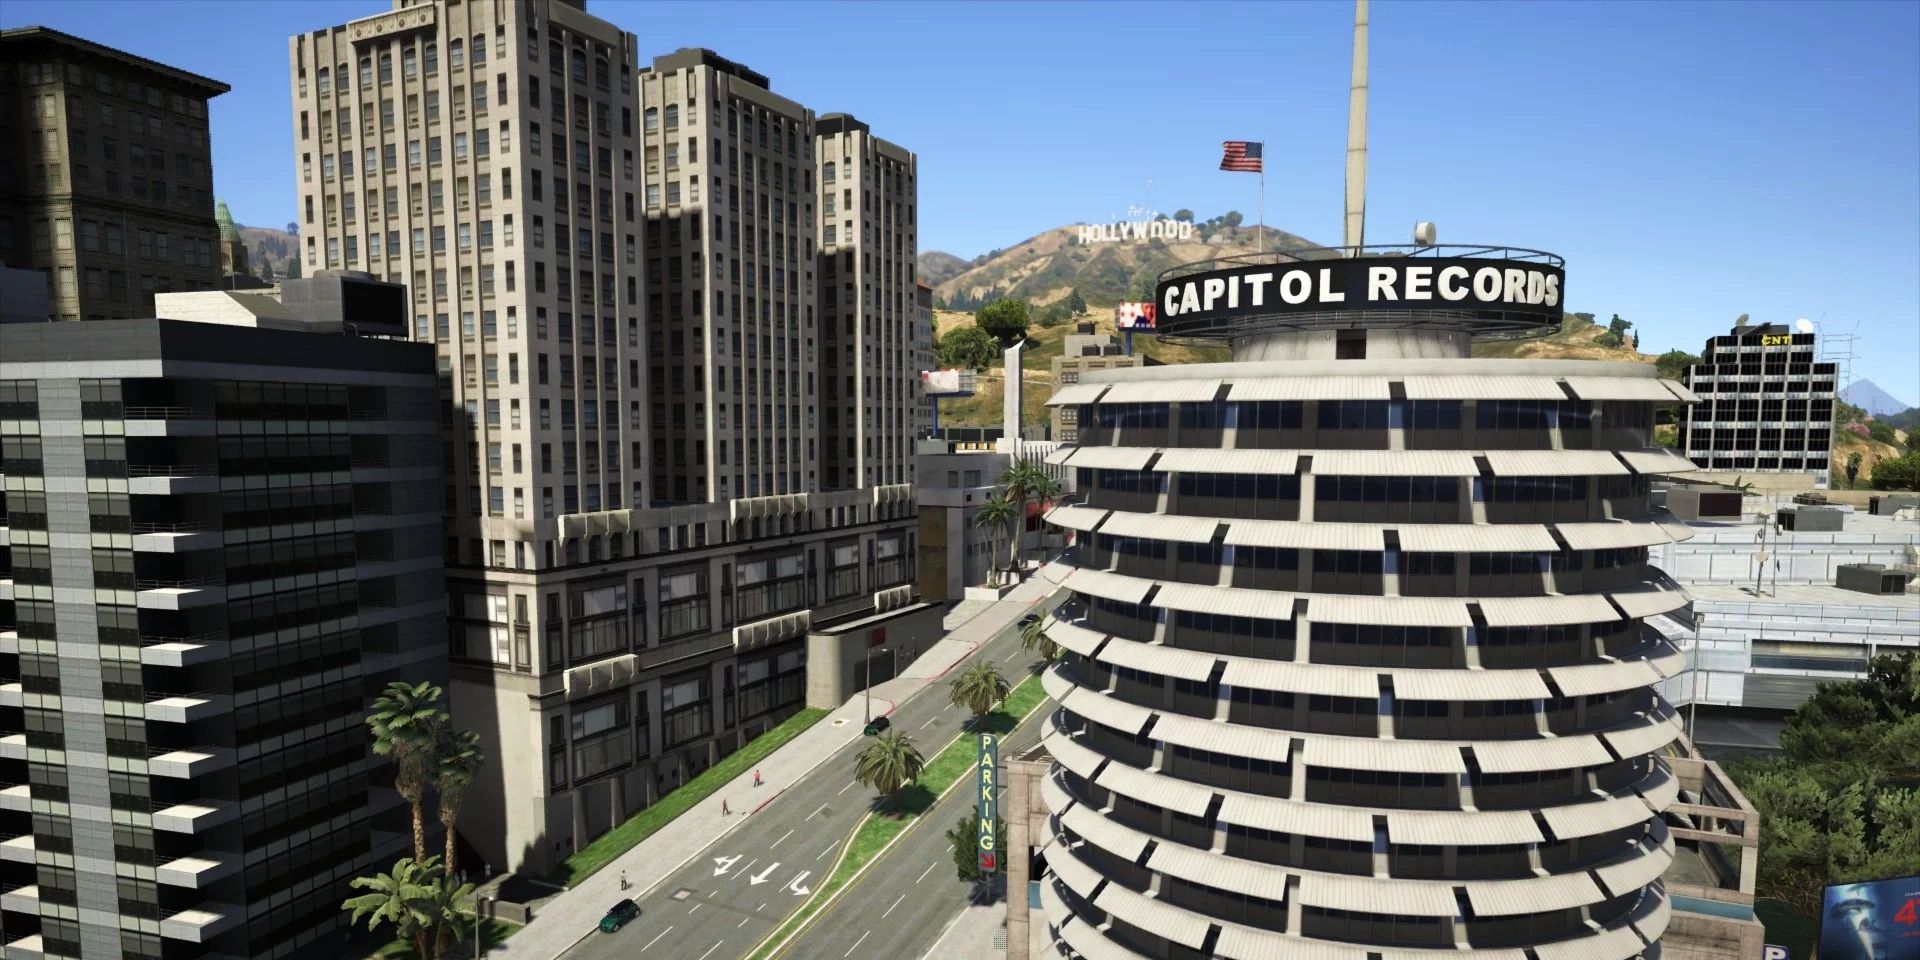 Screenshot of the Real California Architecture mod depicting Capitol Records and the Hollywood sign in GTA V.